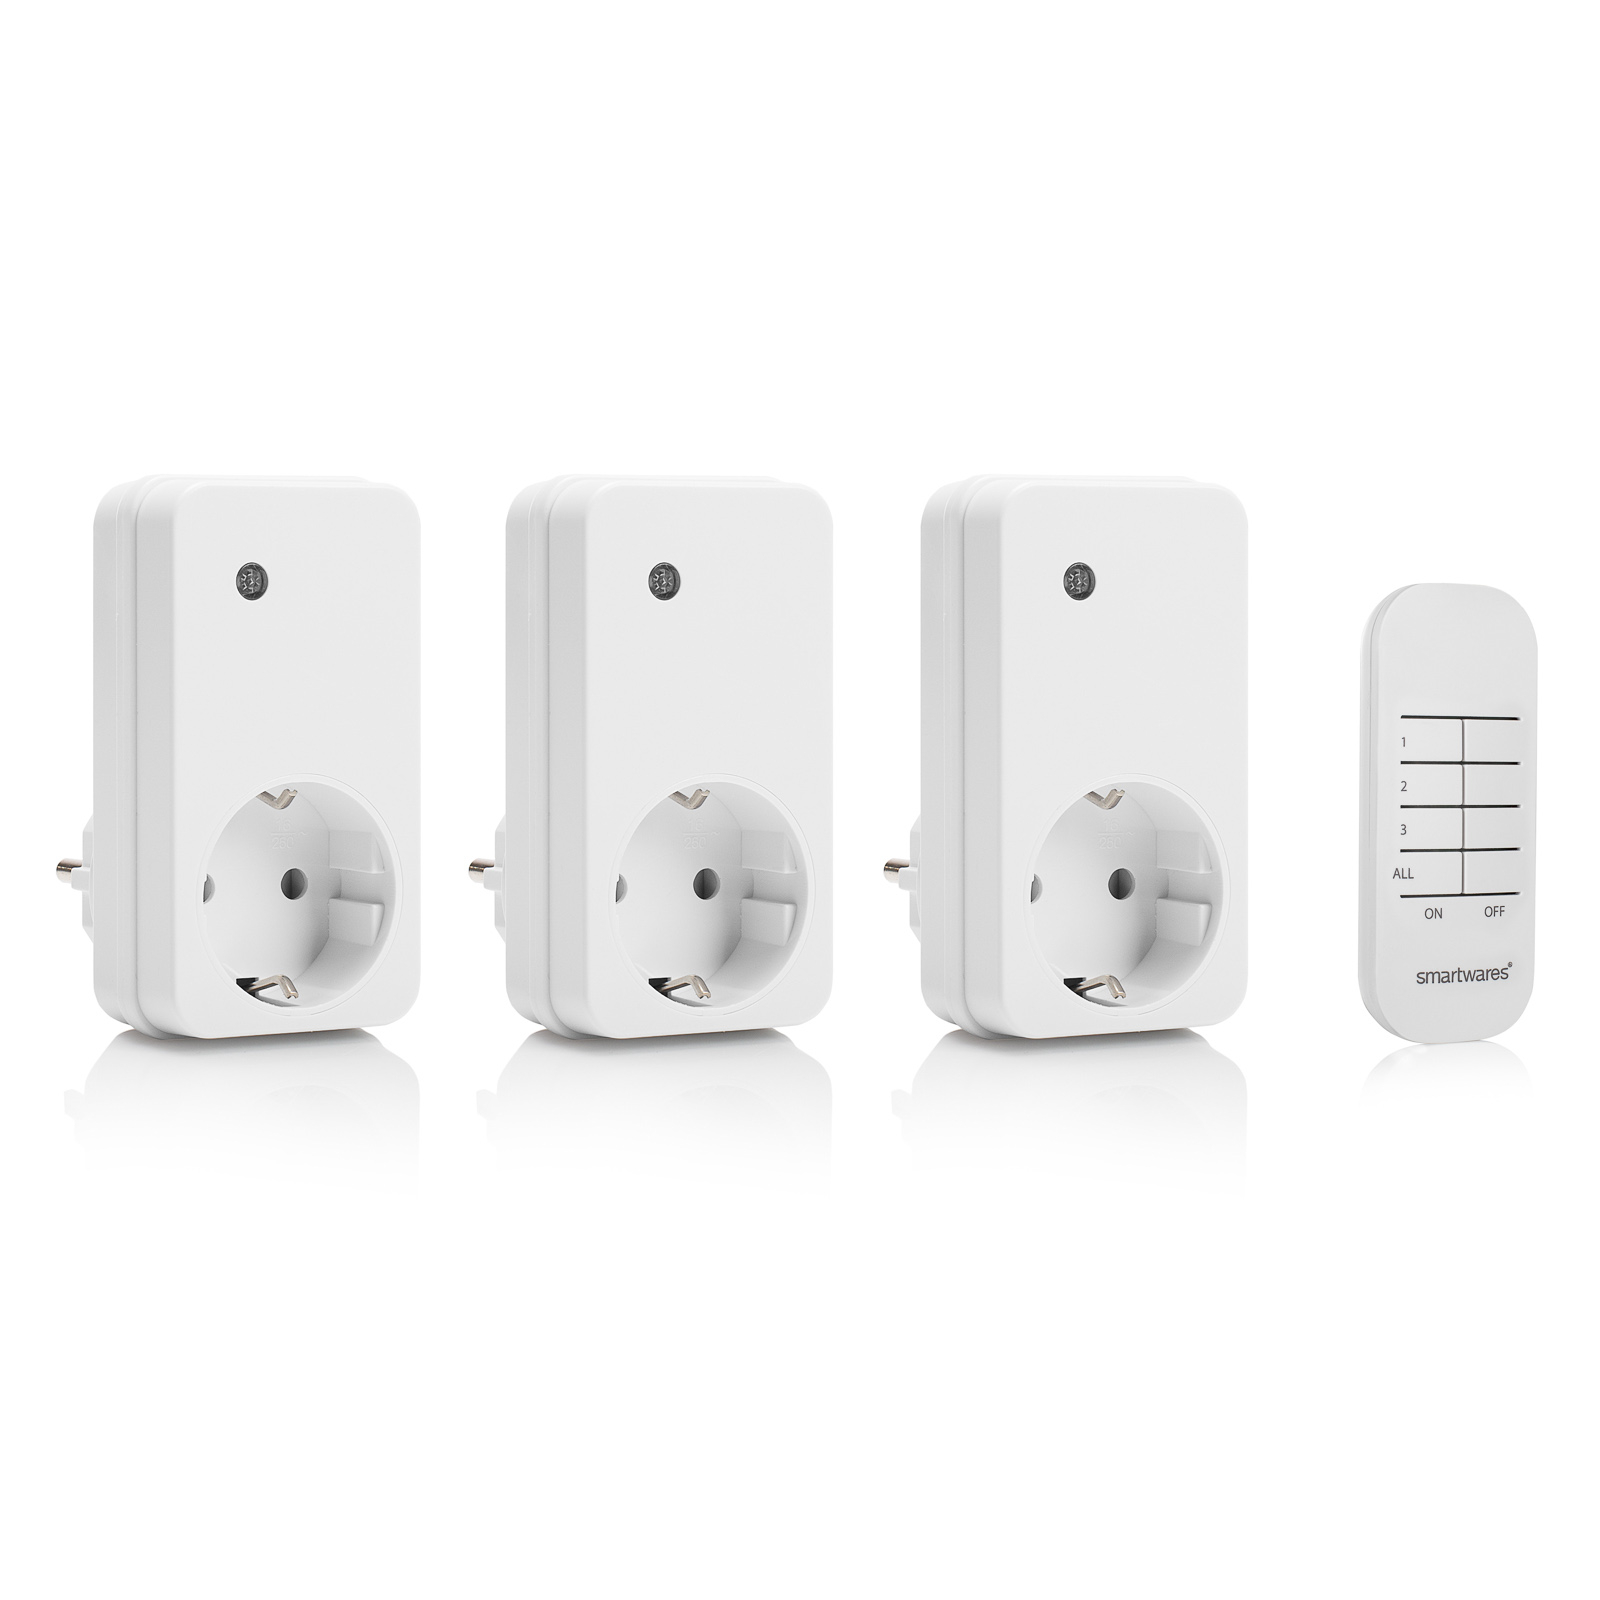 Set of 3 wireless power points SH4-99573 indoors